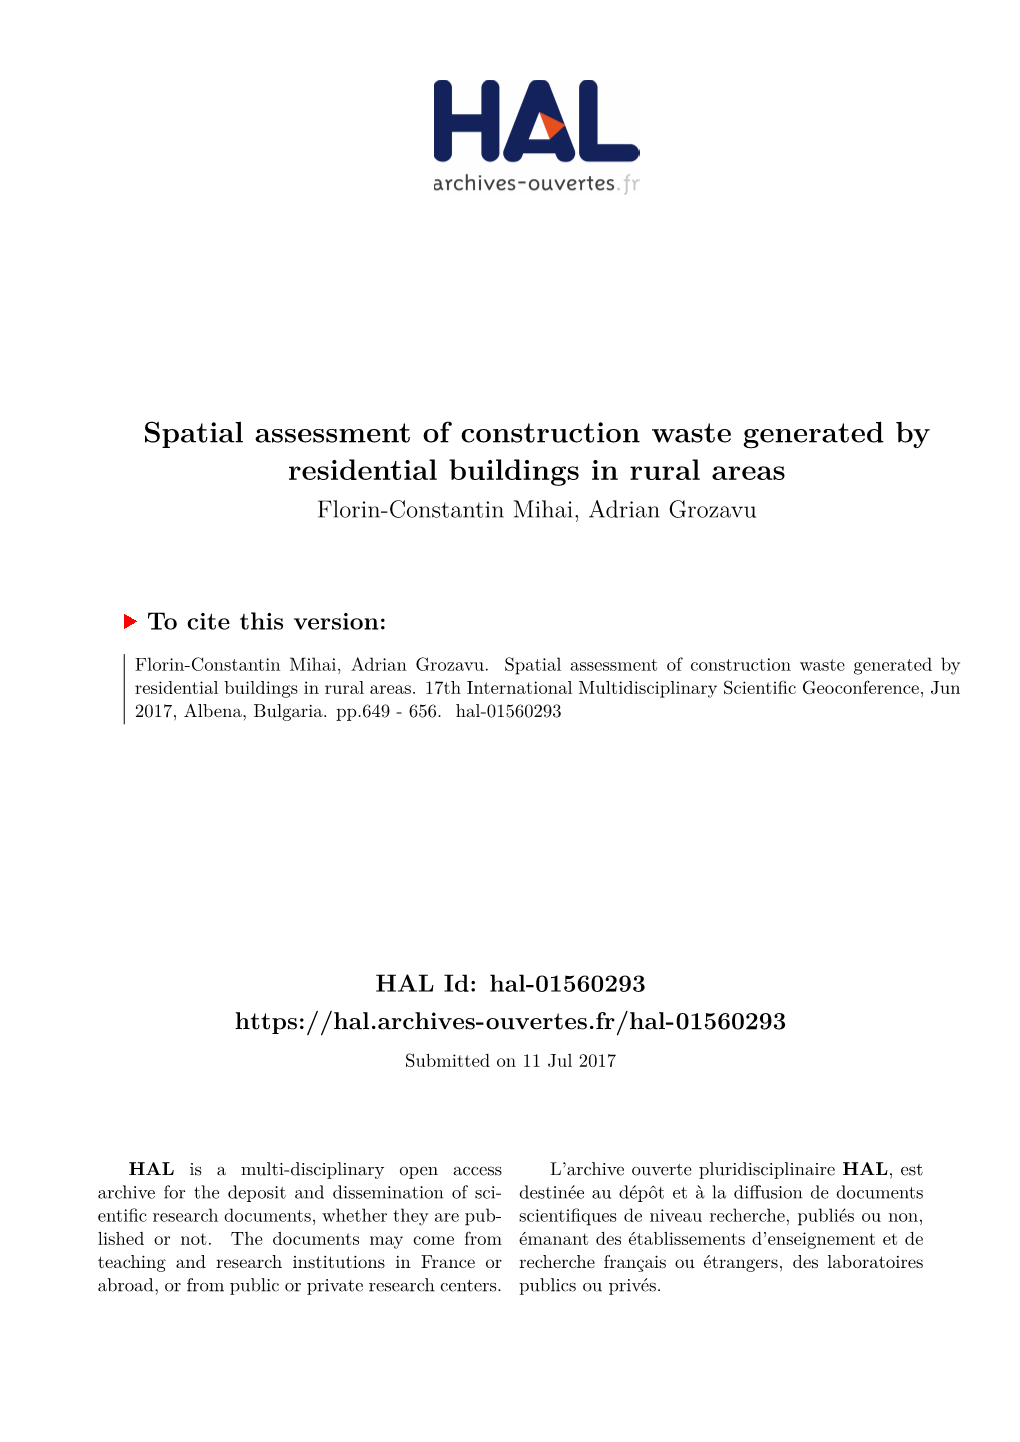 Spatial Assessment of Construction Waste Generated by Residential Buildings in Rural Areas Florin-Constantin Mihai, Adrian Grozavu